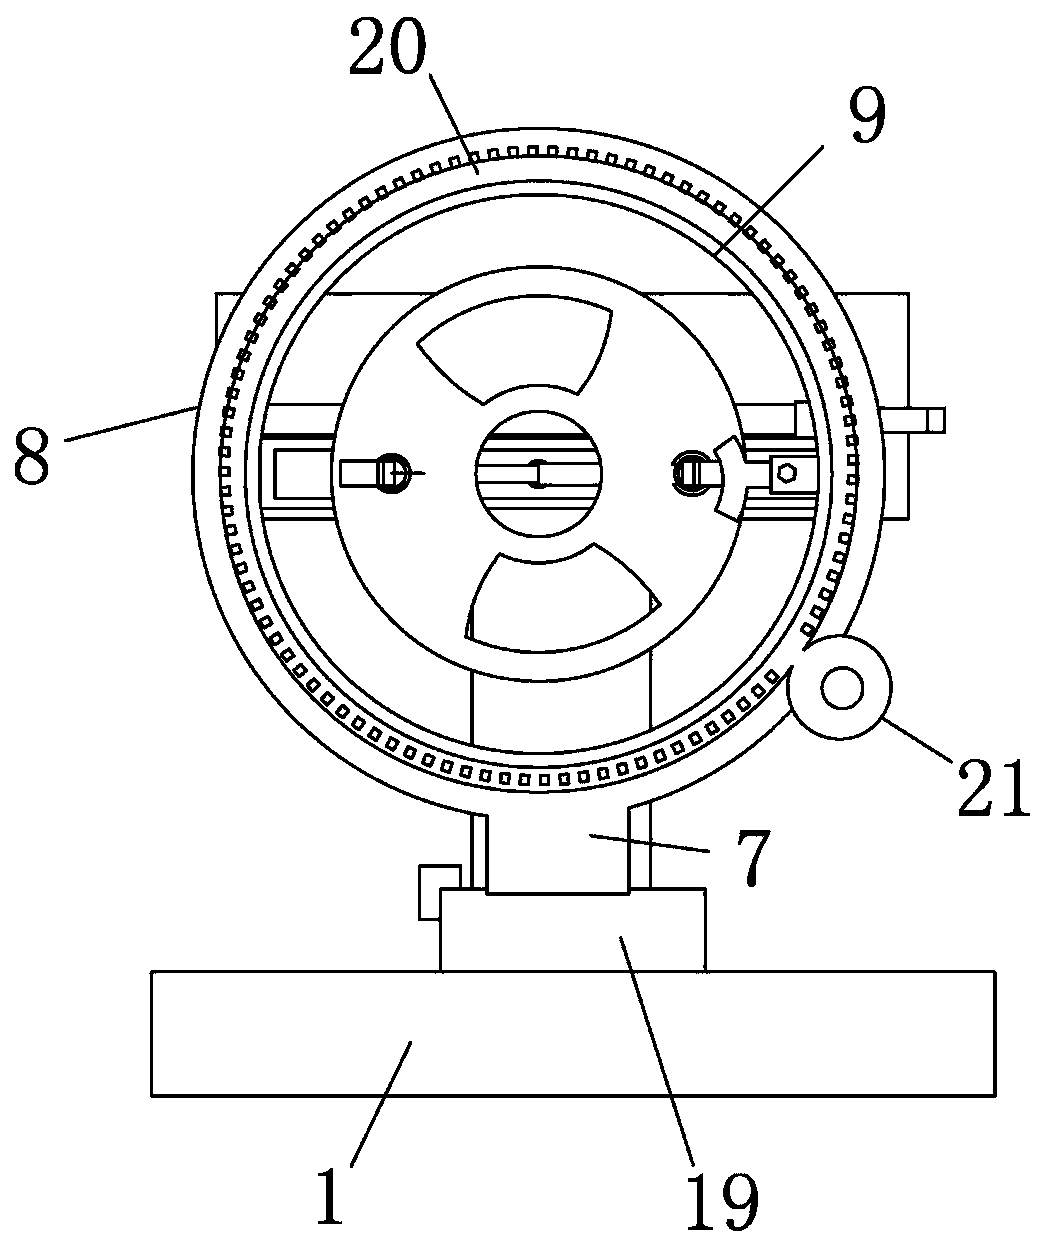 Tool clamp facilitating production of belt pulley